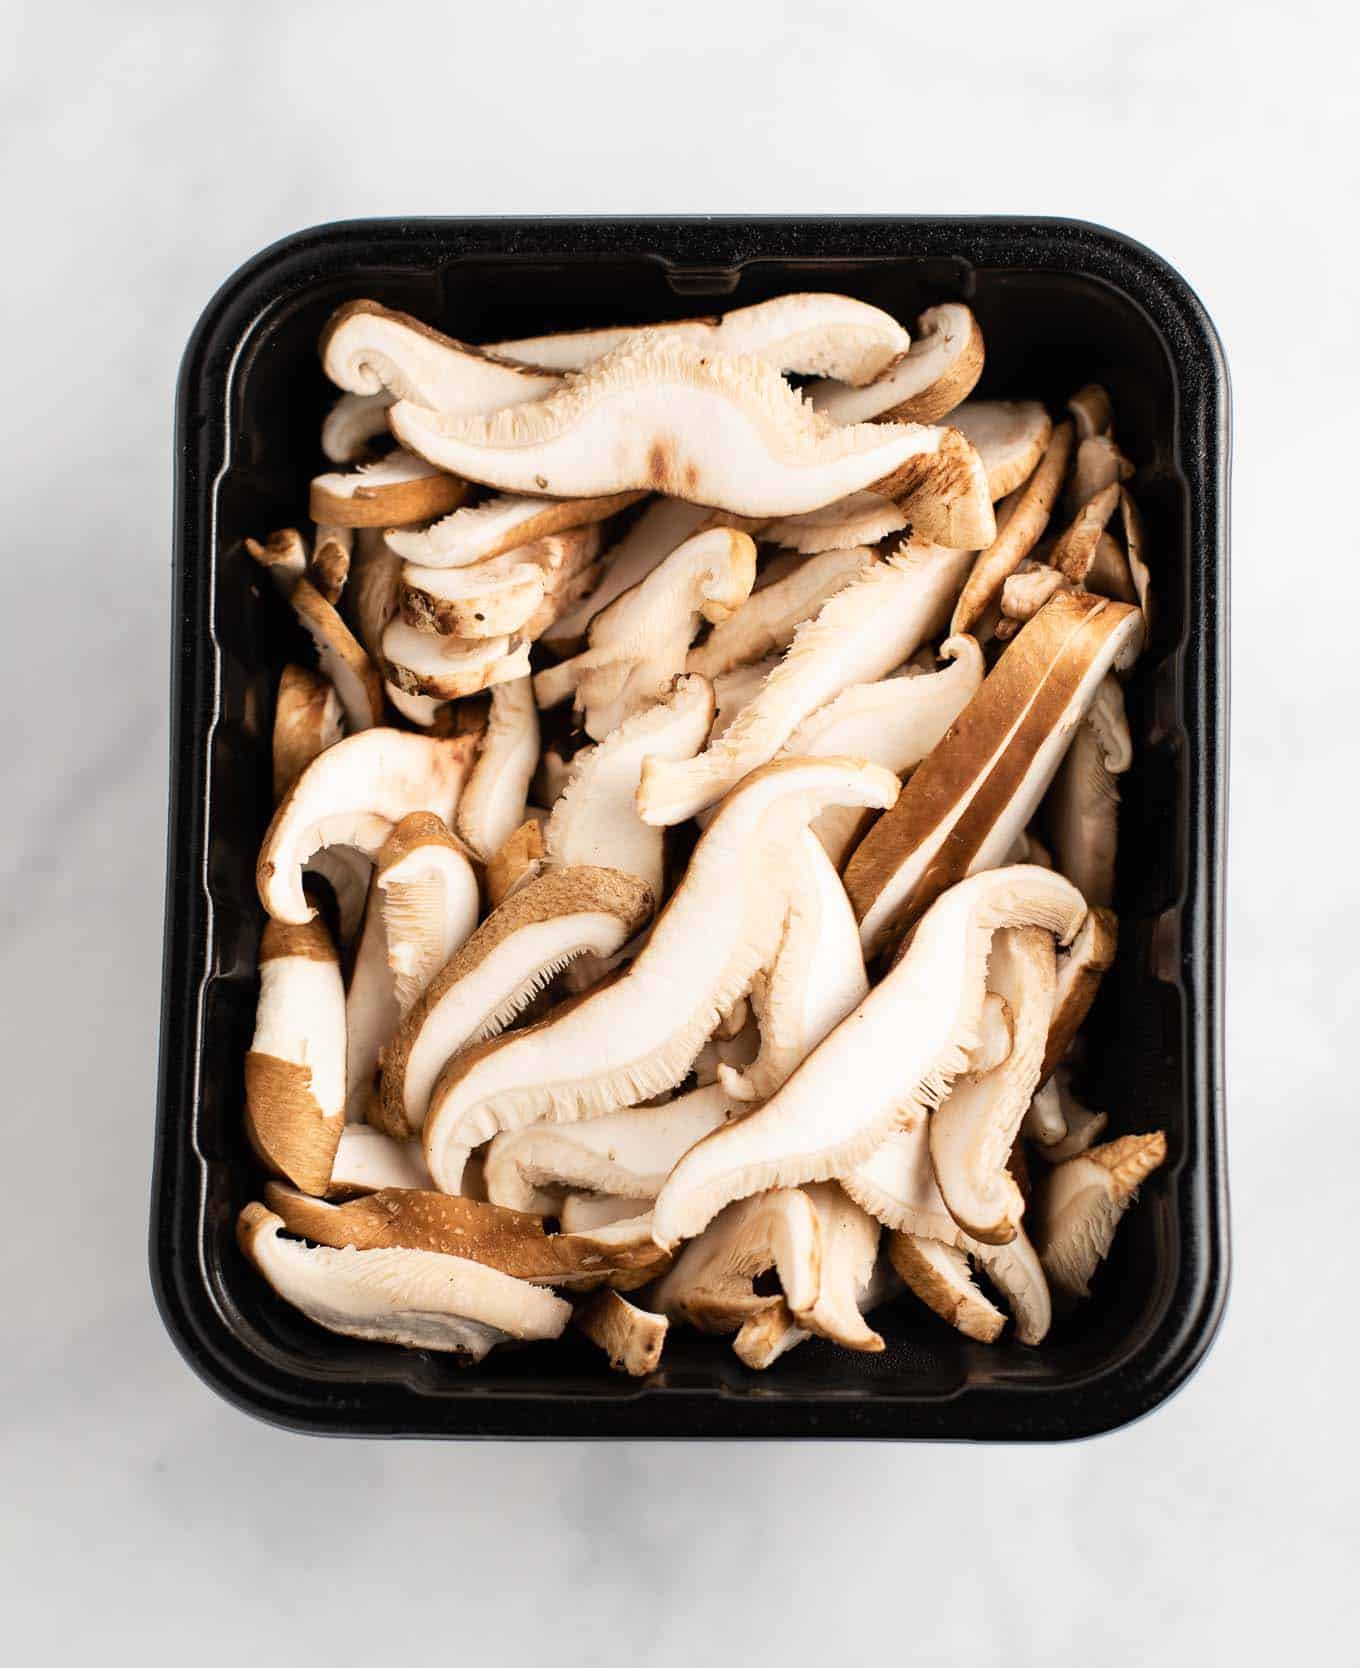 golden oak shitake sliced mushrooms in a produce container from an overhead view